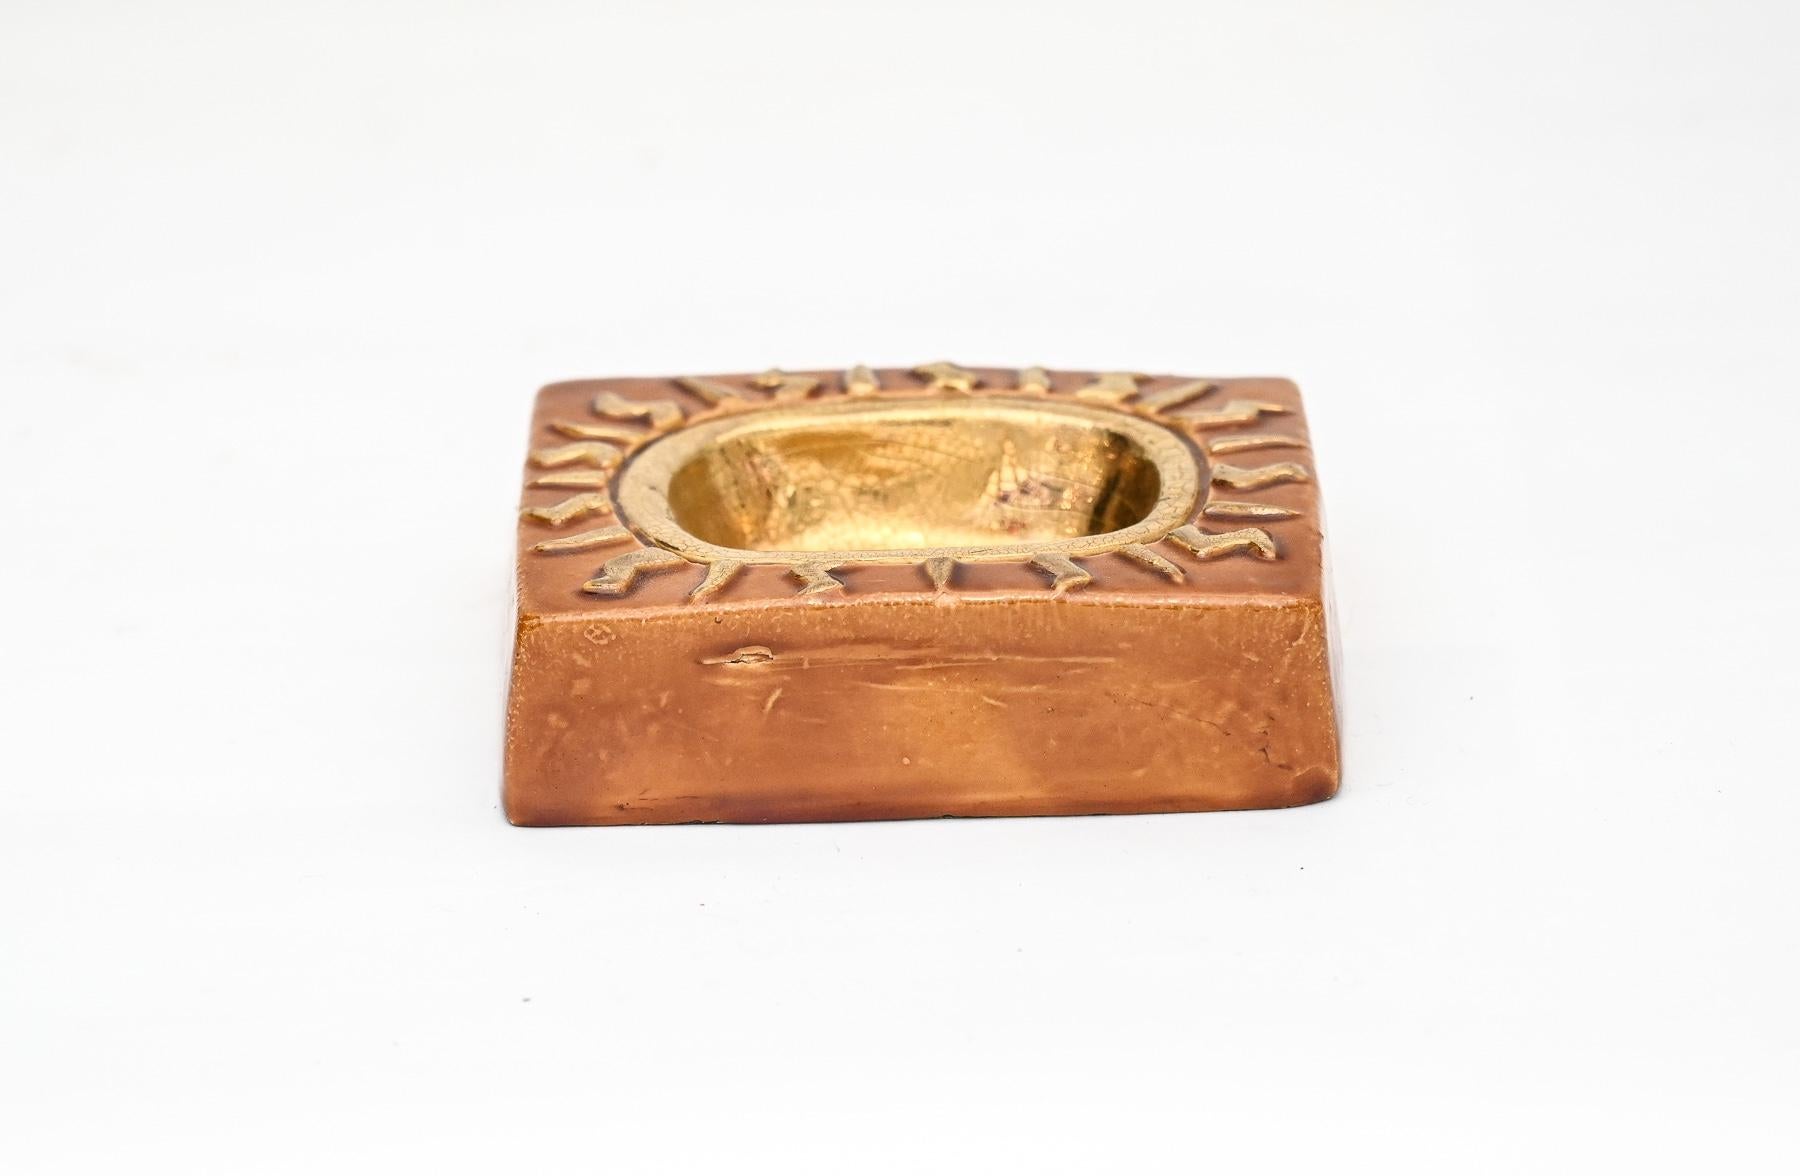 charming “Soleil” jewellery tray by mithe espelt, embossed and glazed earthenware with crackled gold.

France, circa 1958

Identical glaze to the model illustrated on page 20 of the Mithé Espelt book “the discreet luxury of the everyday” by Antoine